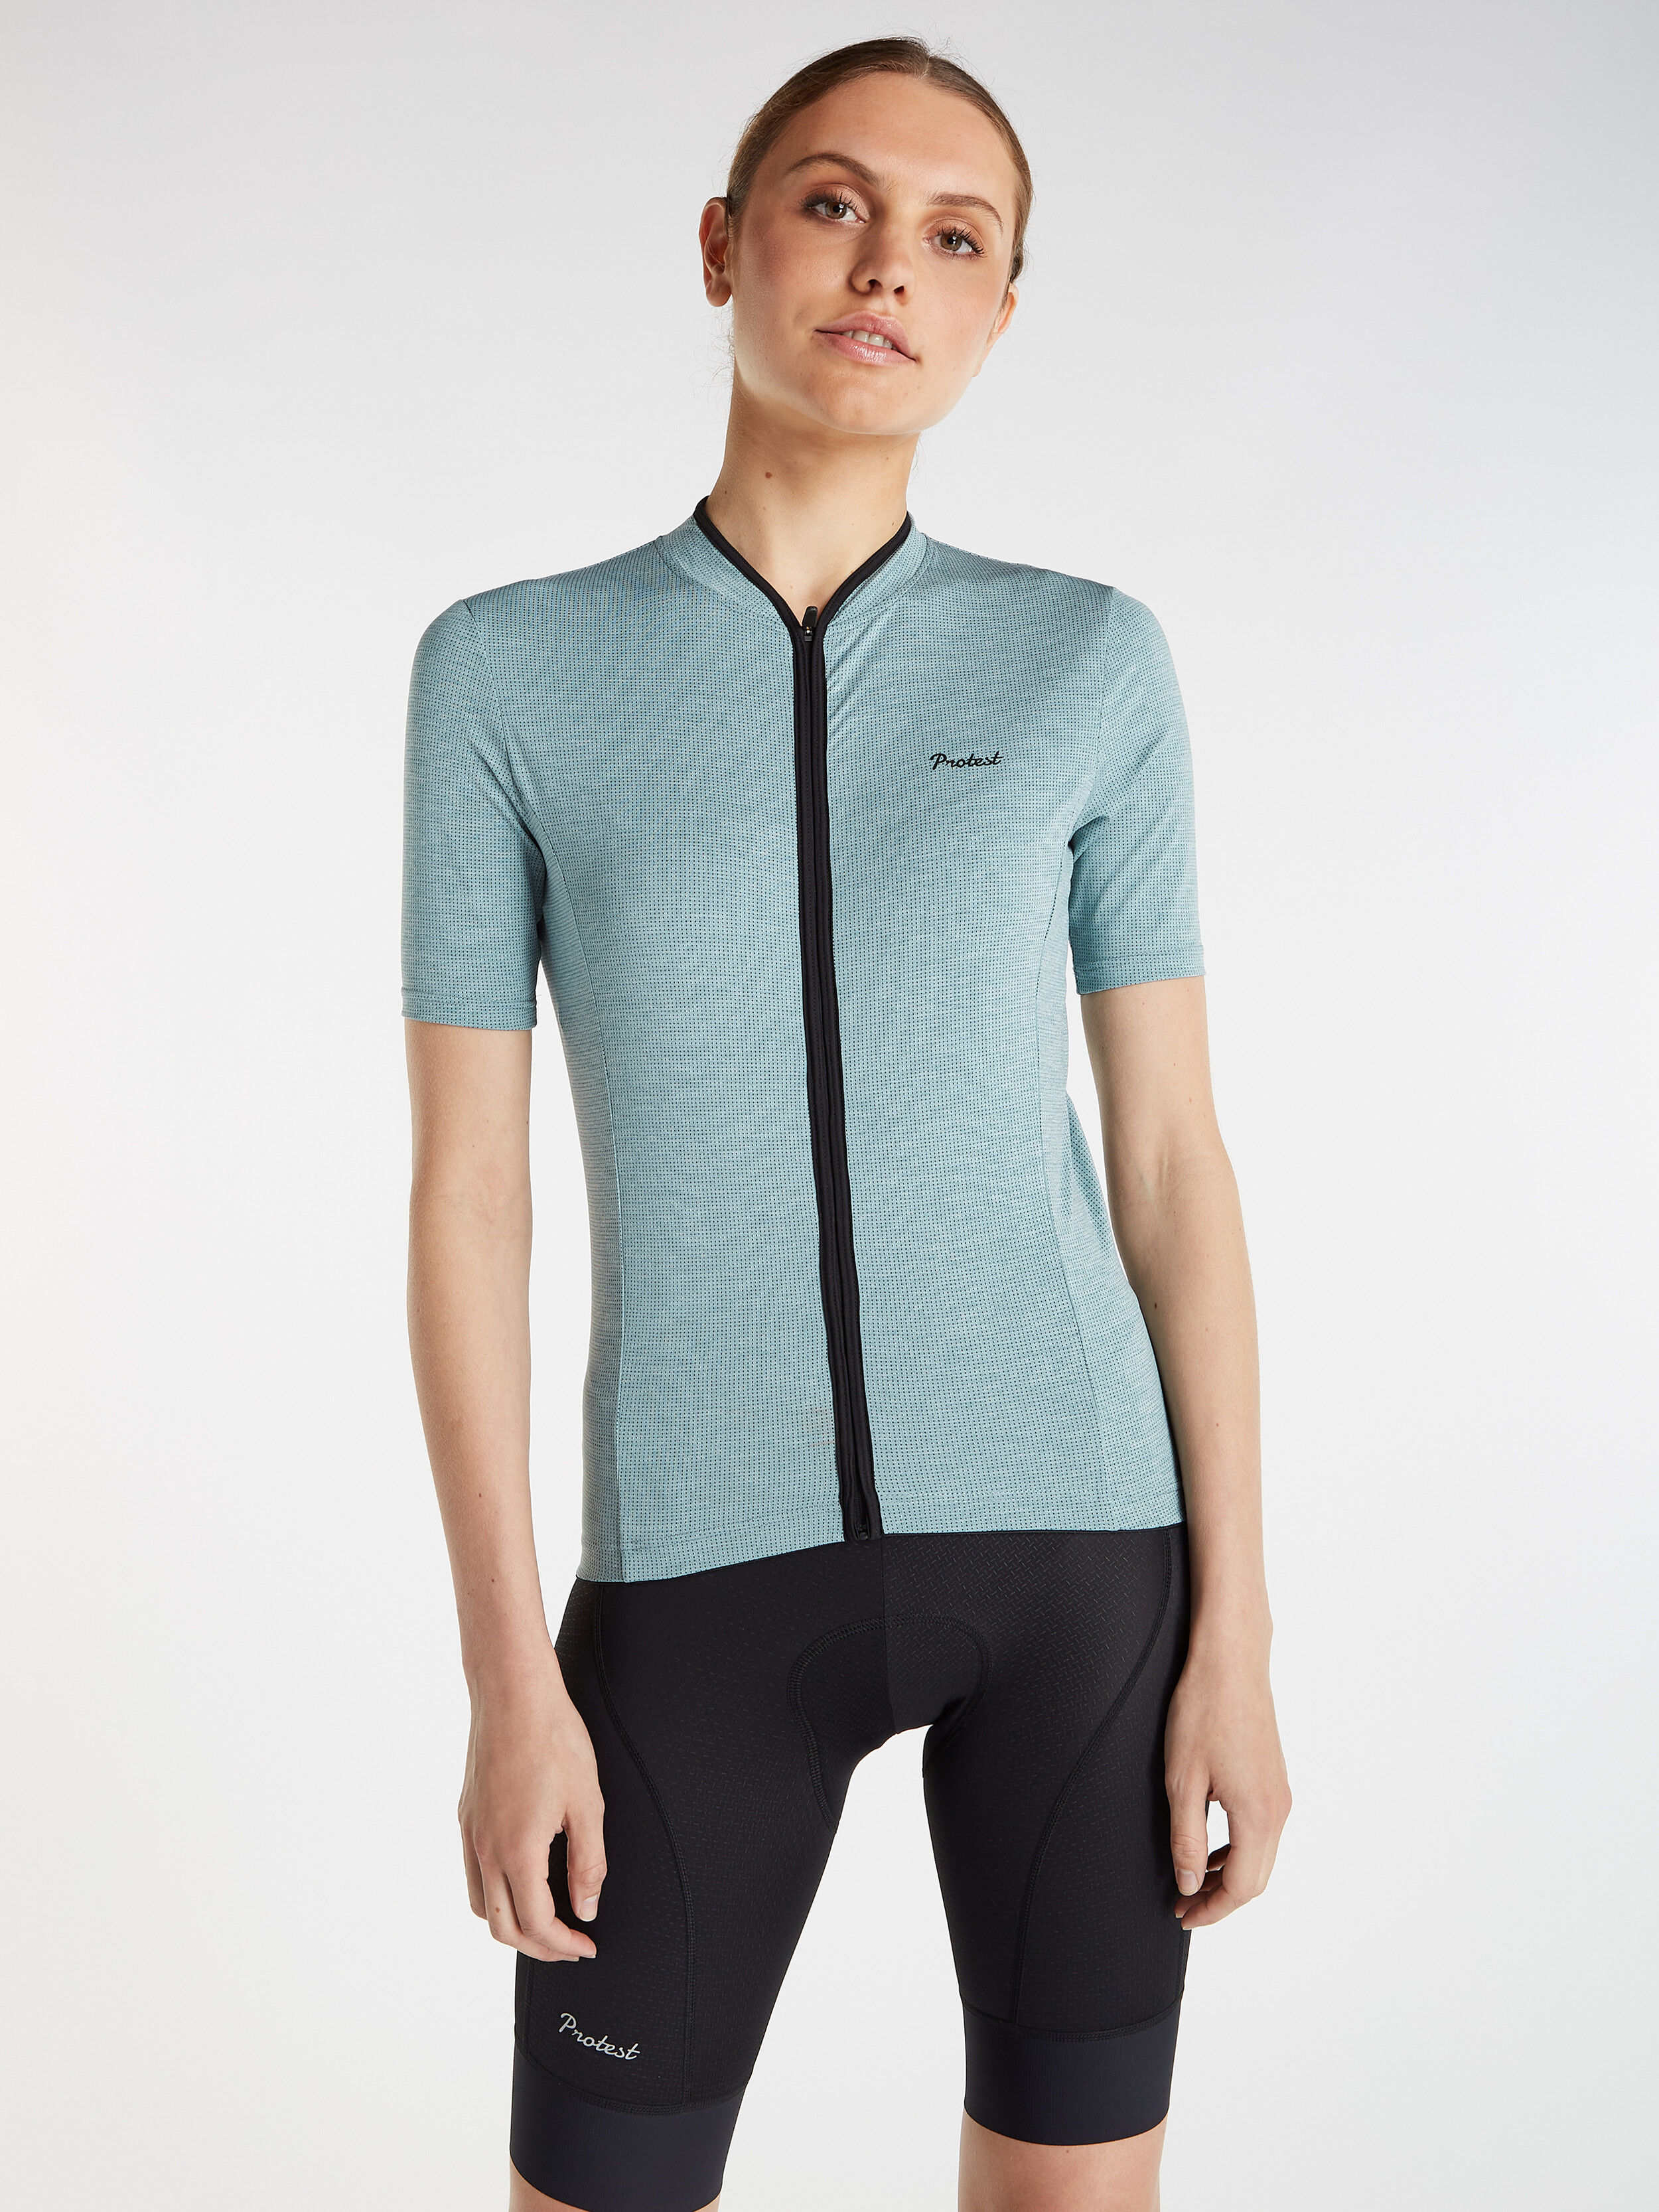 Protest Prtcashew - Cycling jersey - Women's | Hardloop